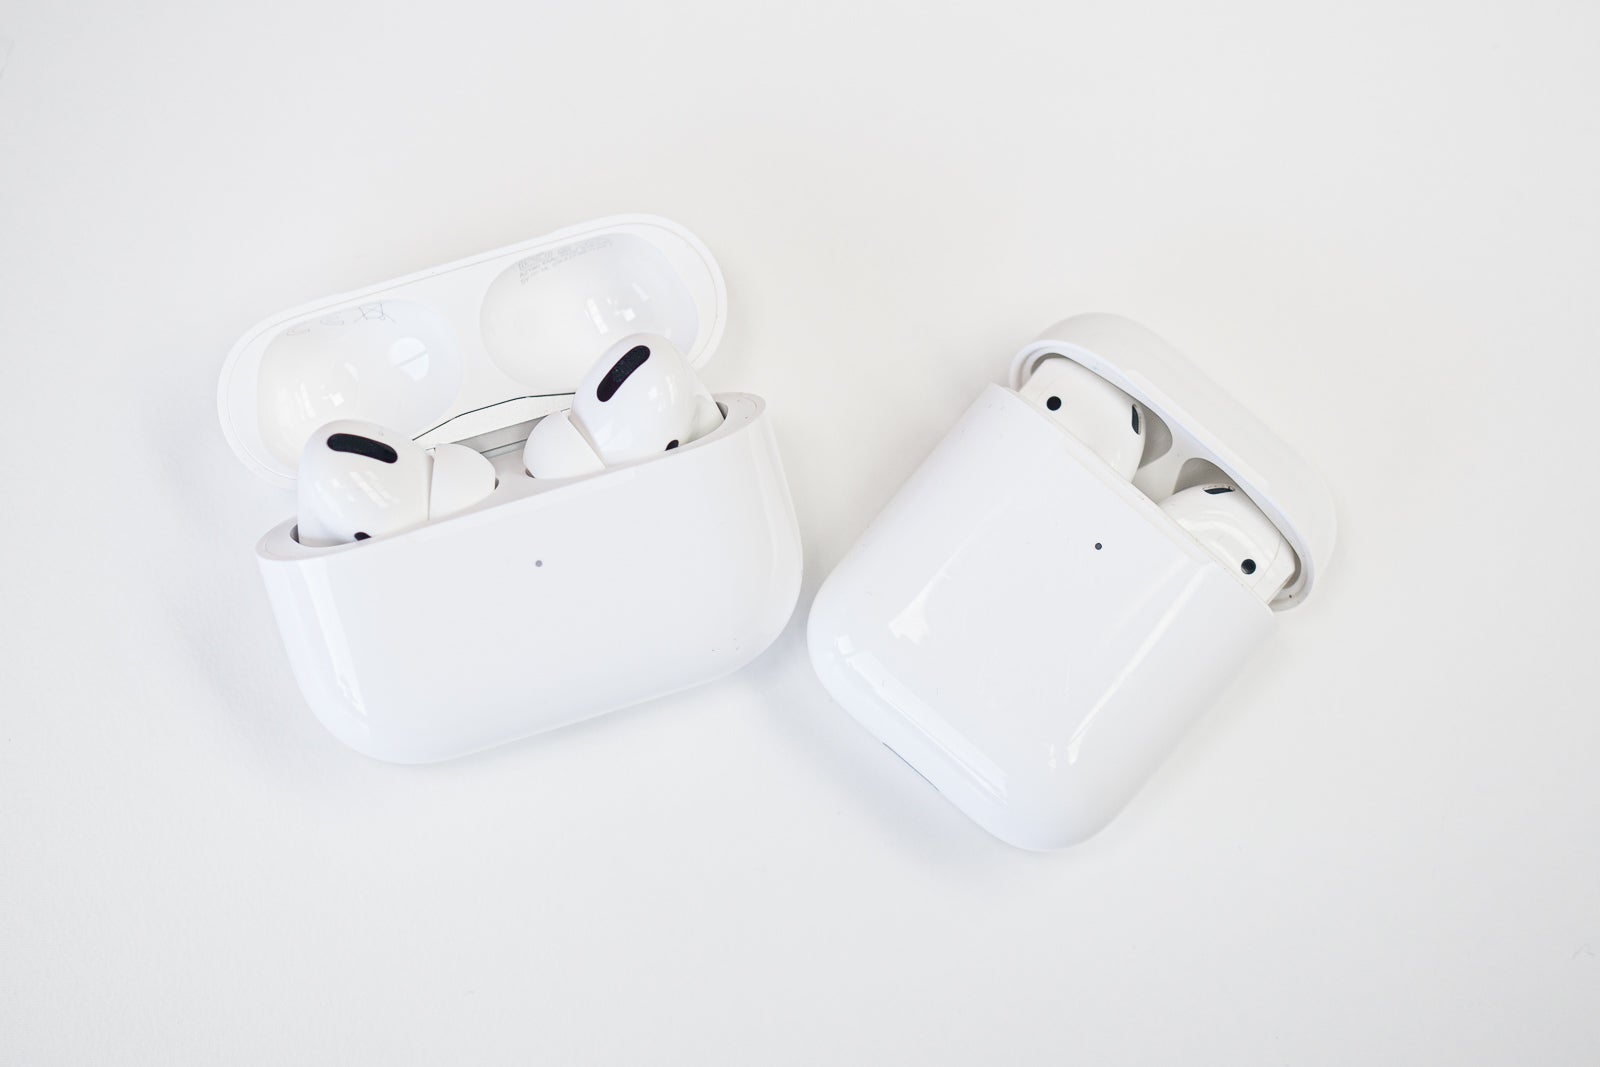 AirPods Pro on the left vs. AirPods on the right - AirPods Pro 2 will weather the fall supply chain storm